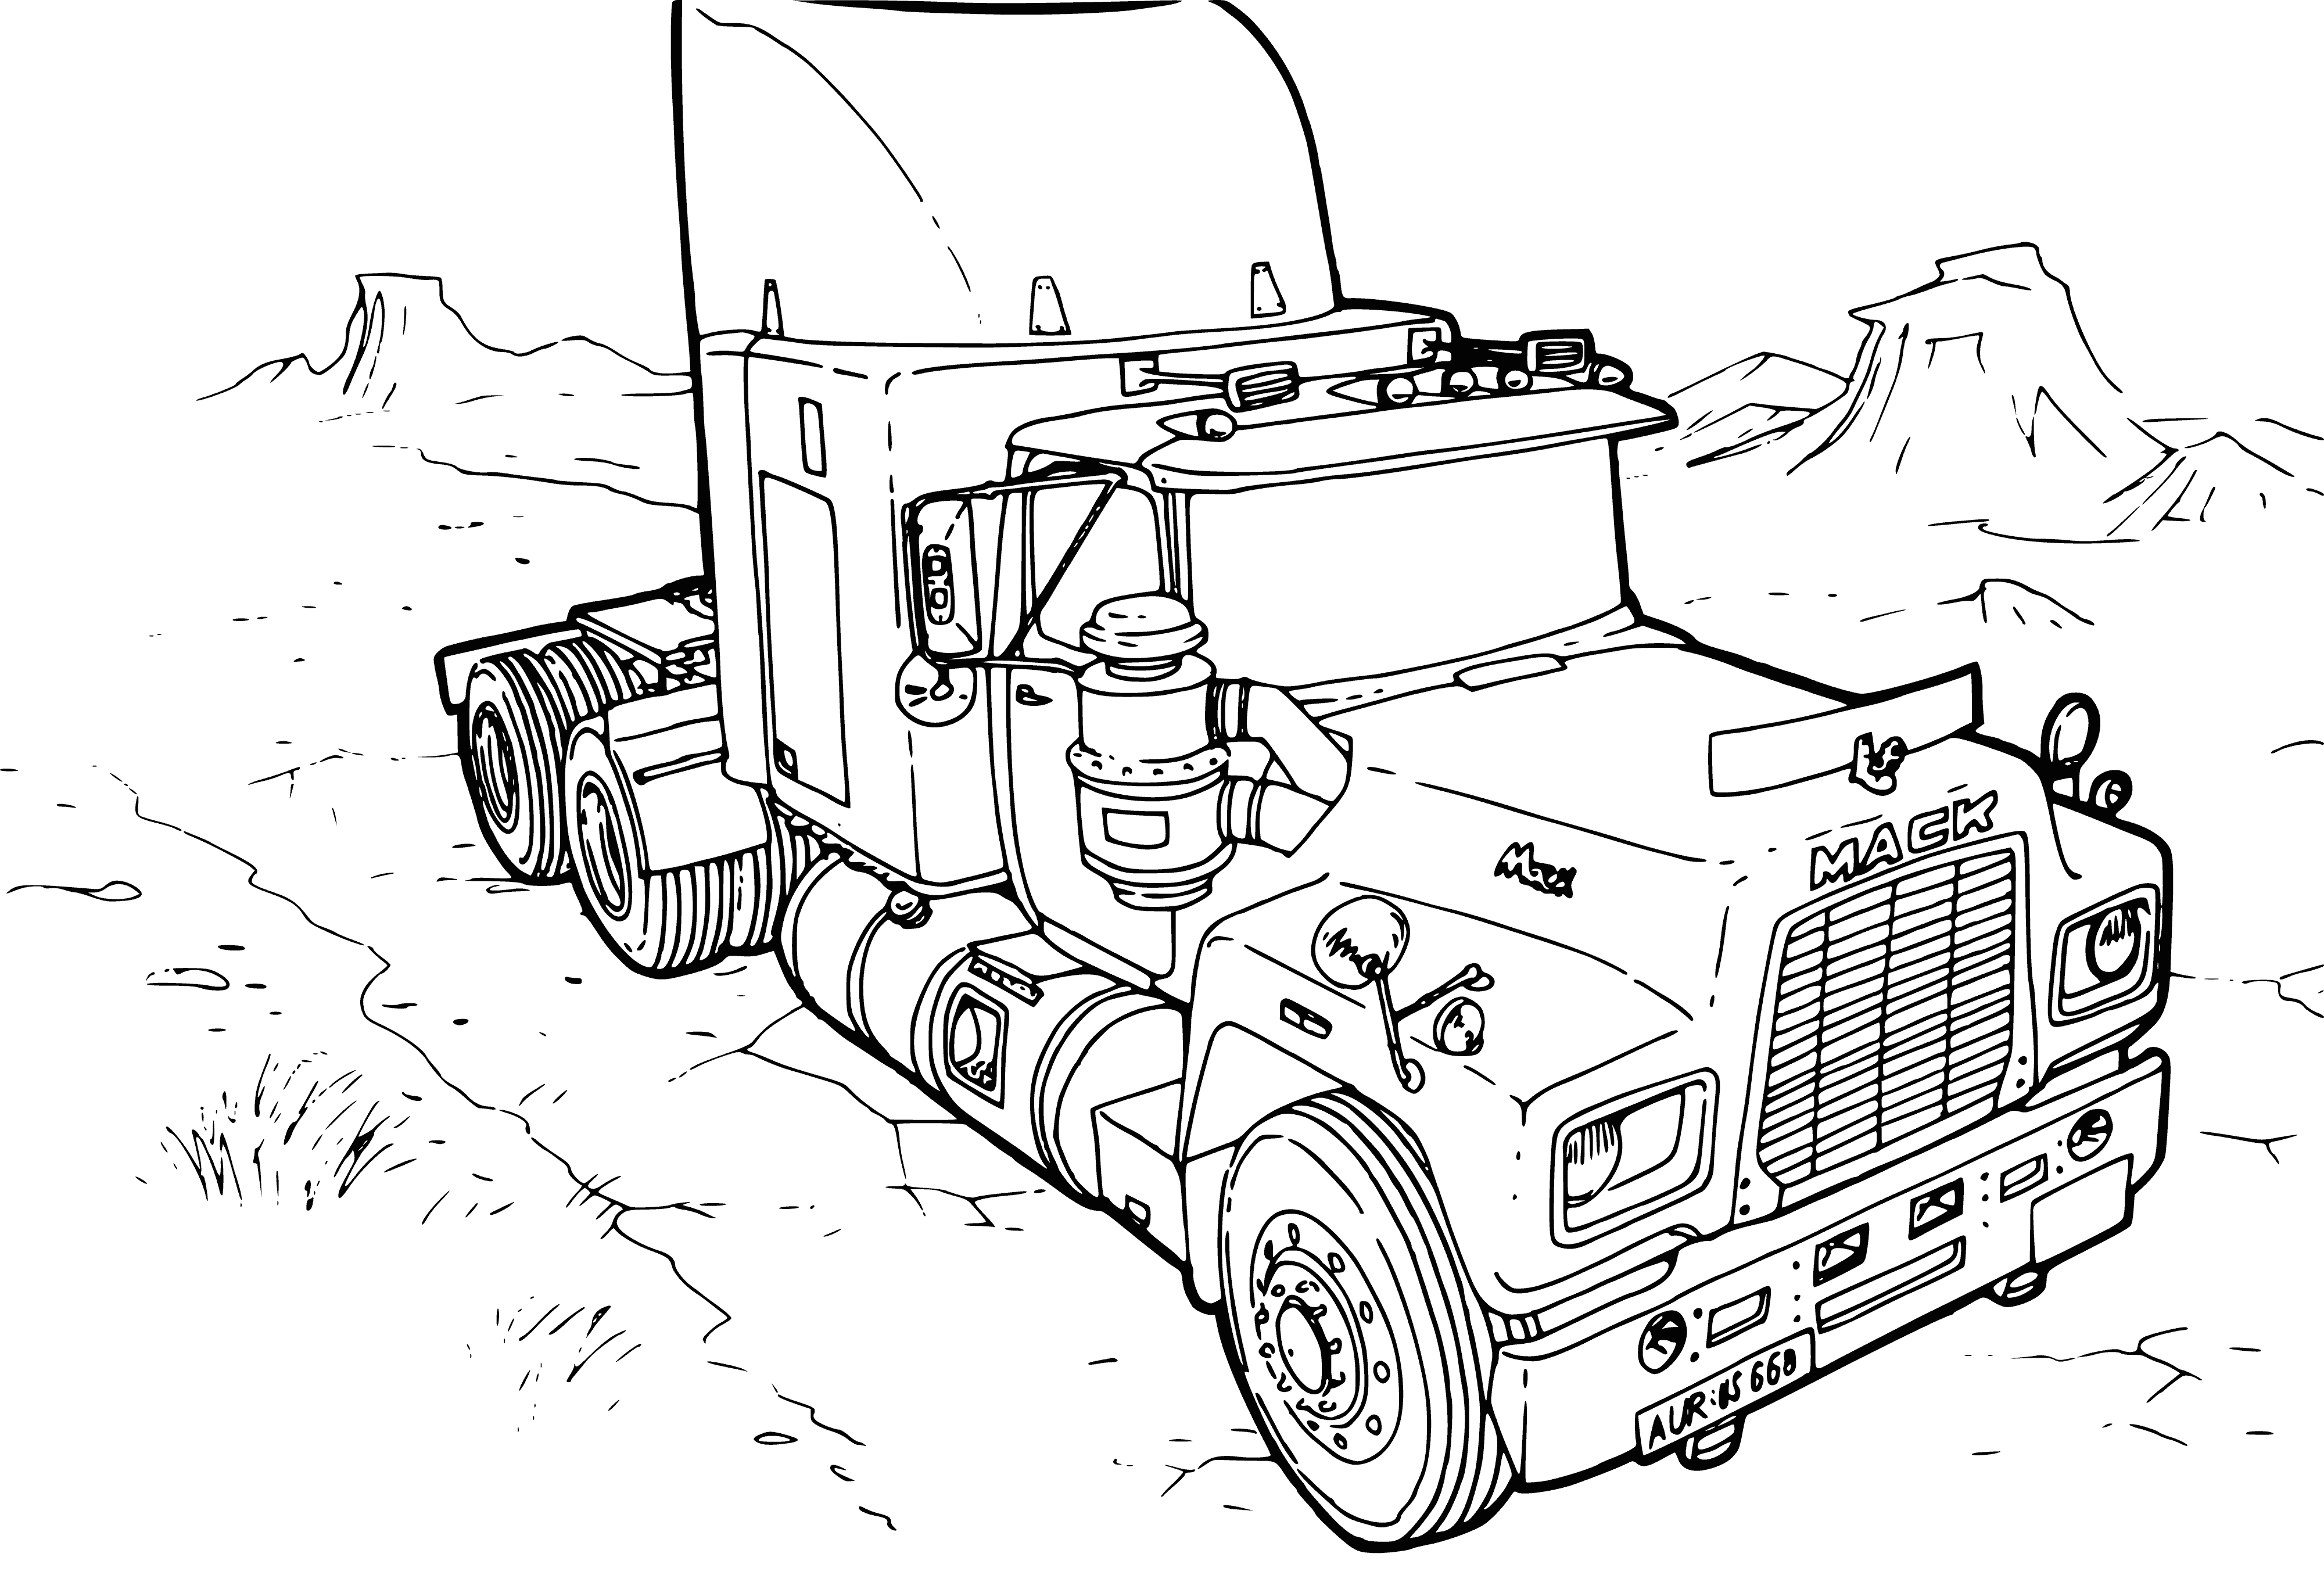 coloring page: Several trucks/tractors of different sizes and colors, incl. a blue dump truck in the middle. #ColoringPage